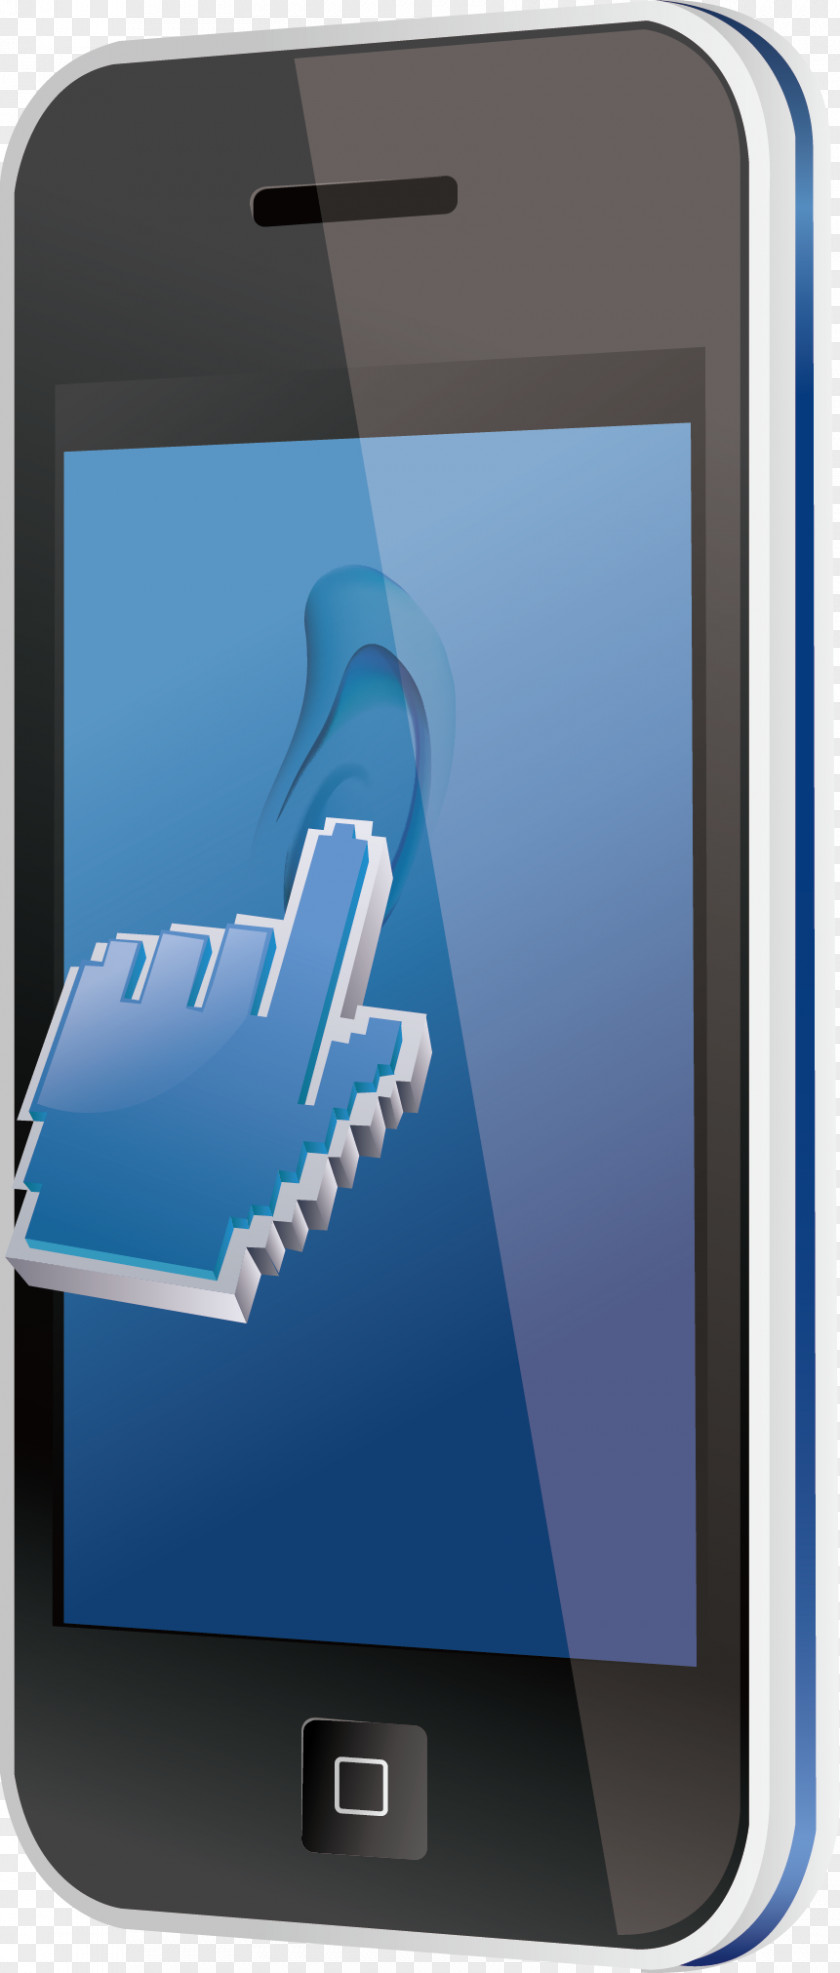 The Hands Of Mobile Phone Screen Smartphone Feature Touchscreen Telephone PNG